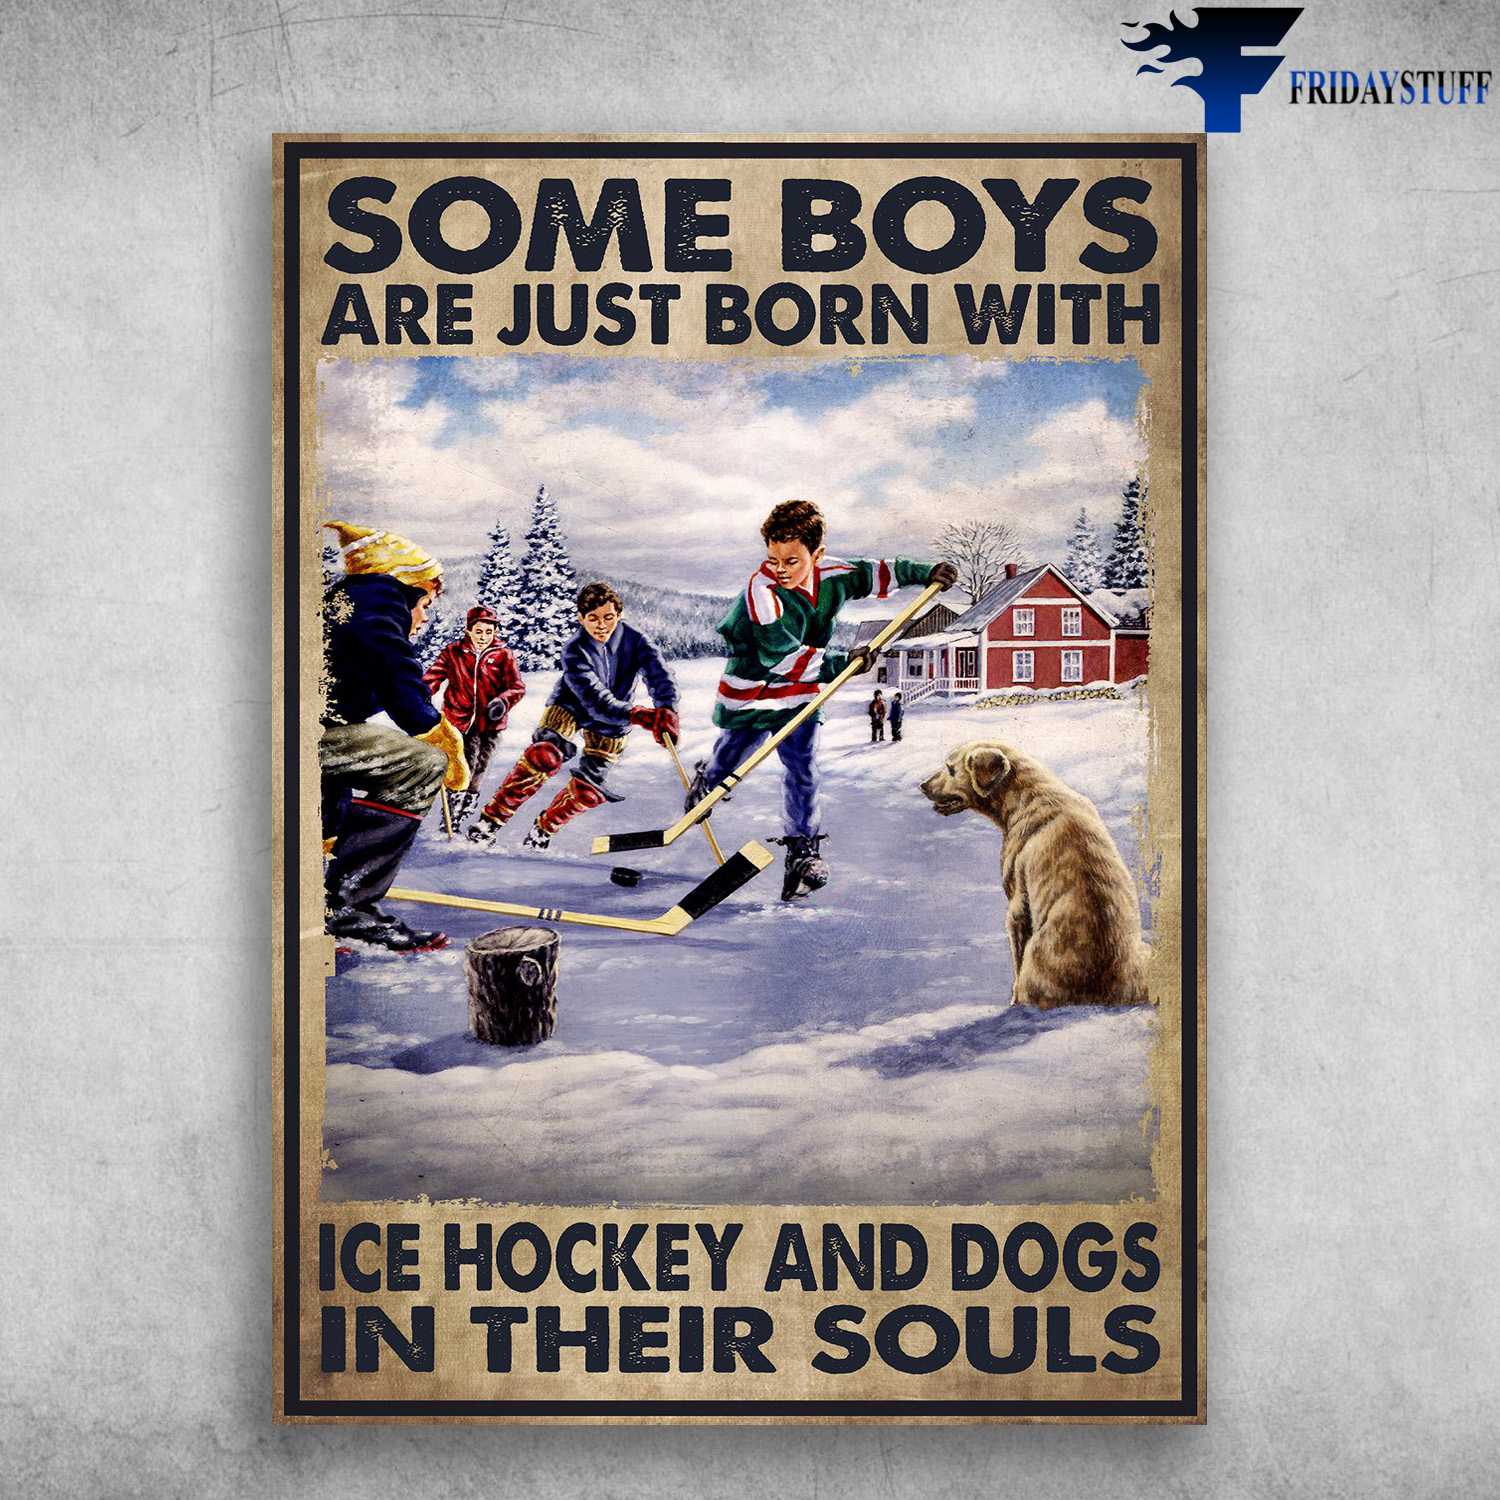 Ice Hockey Boys - Some Boys Are Just Born With, Ice Hockey And Dogs In Their Souls